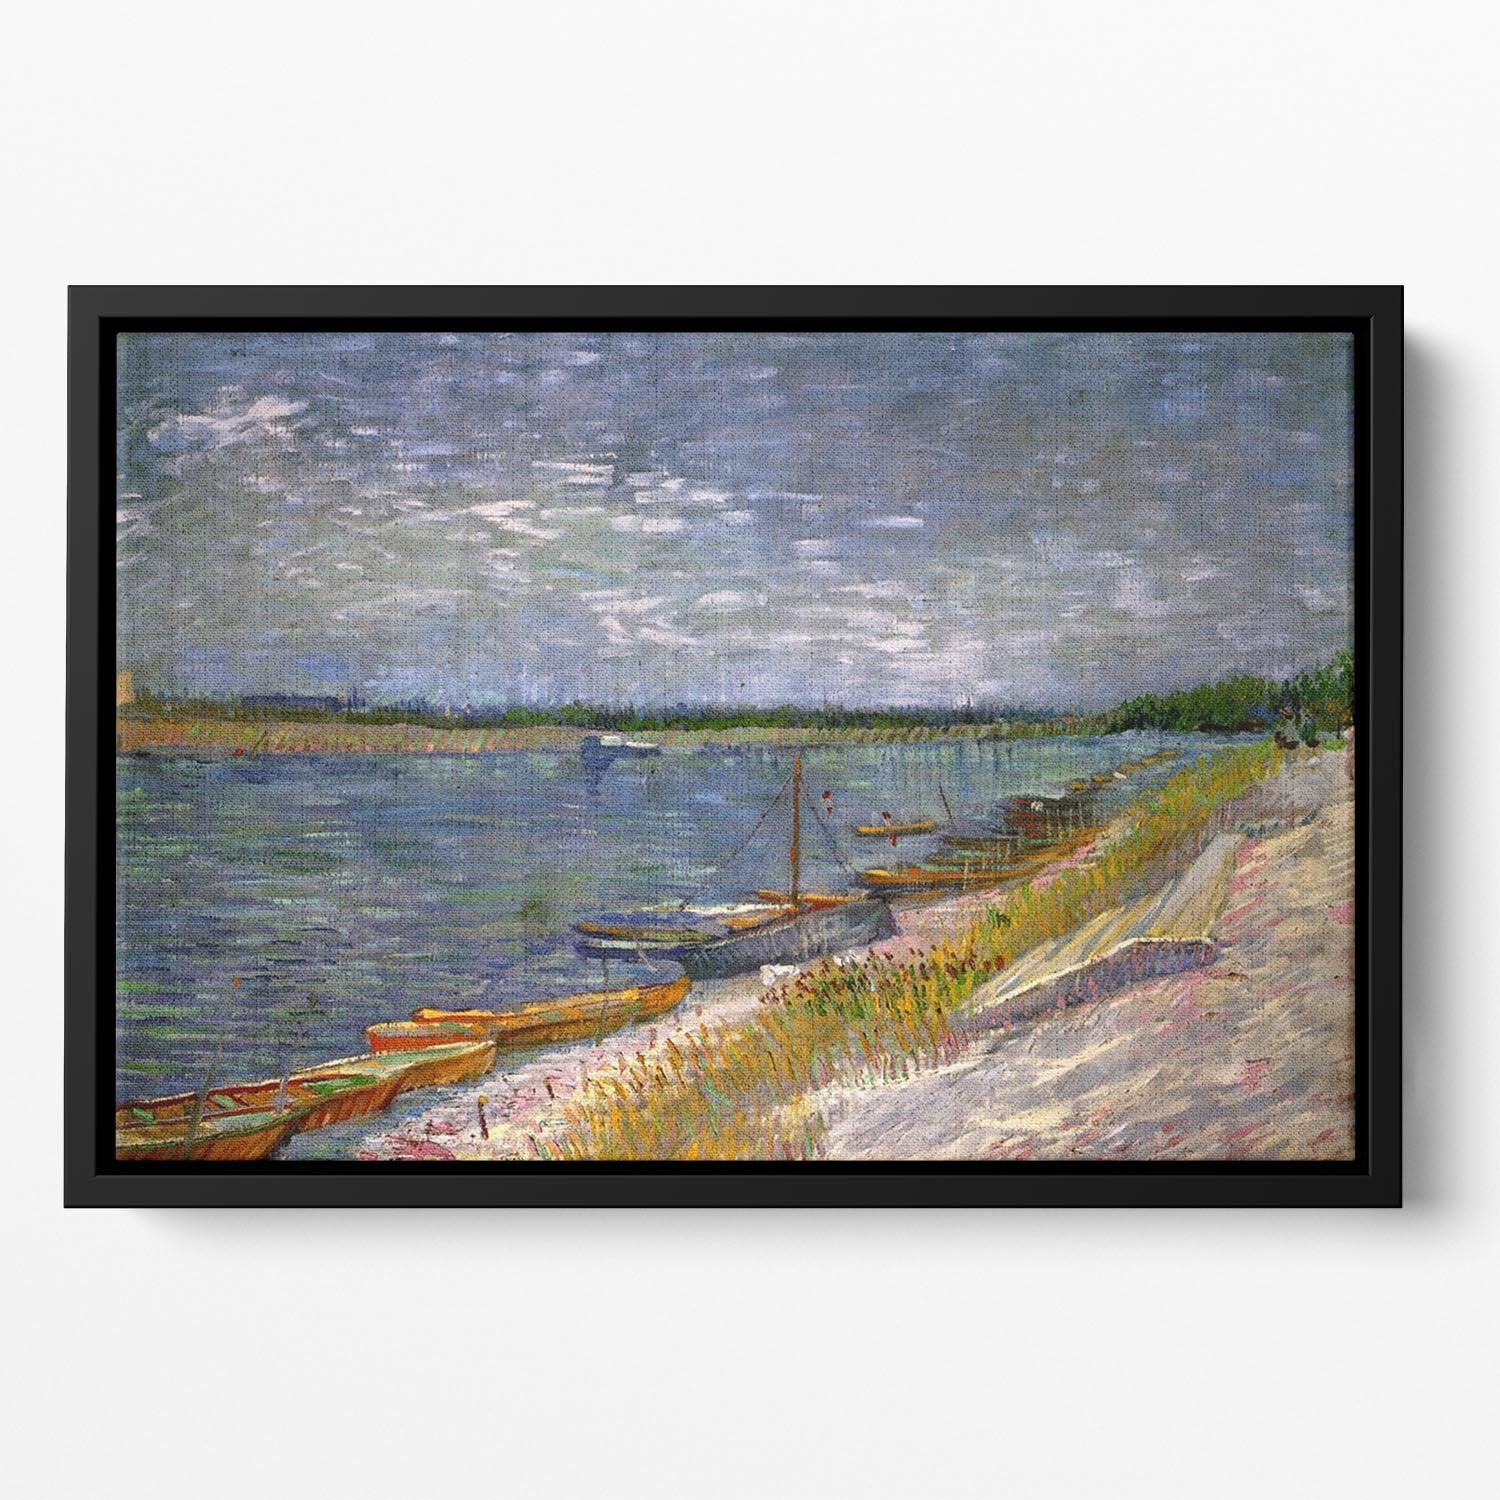 View of a River with Rowing Boats by Van Gogh Floating Framed Canvas